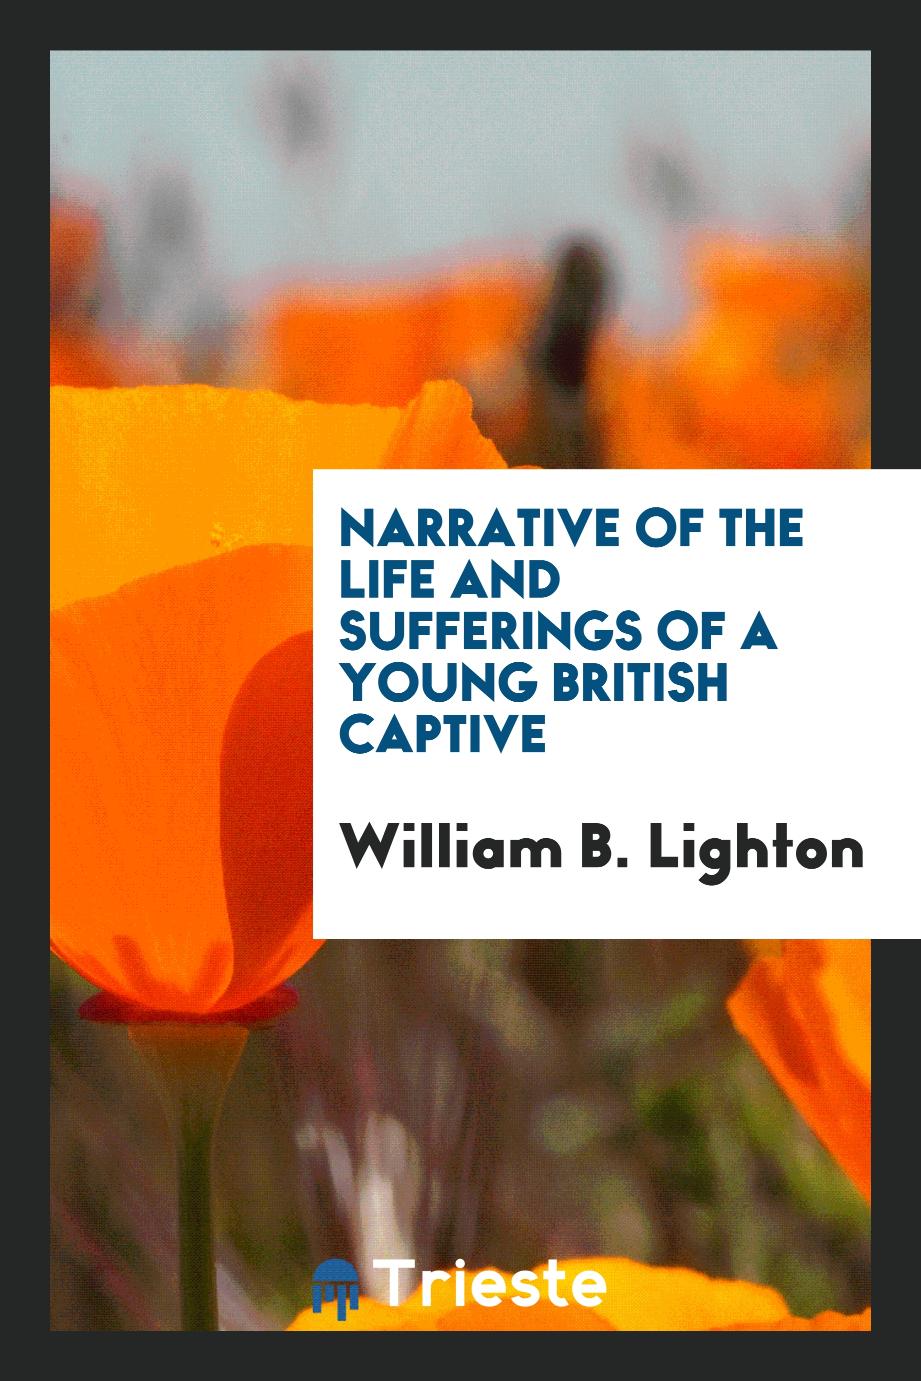 Narrative of the life and sufferings of a young British captive